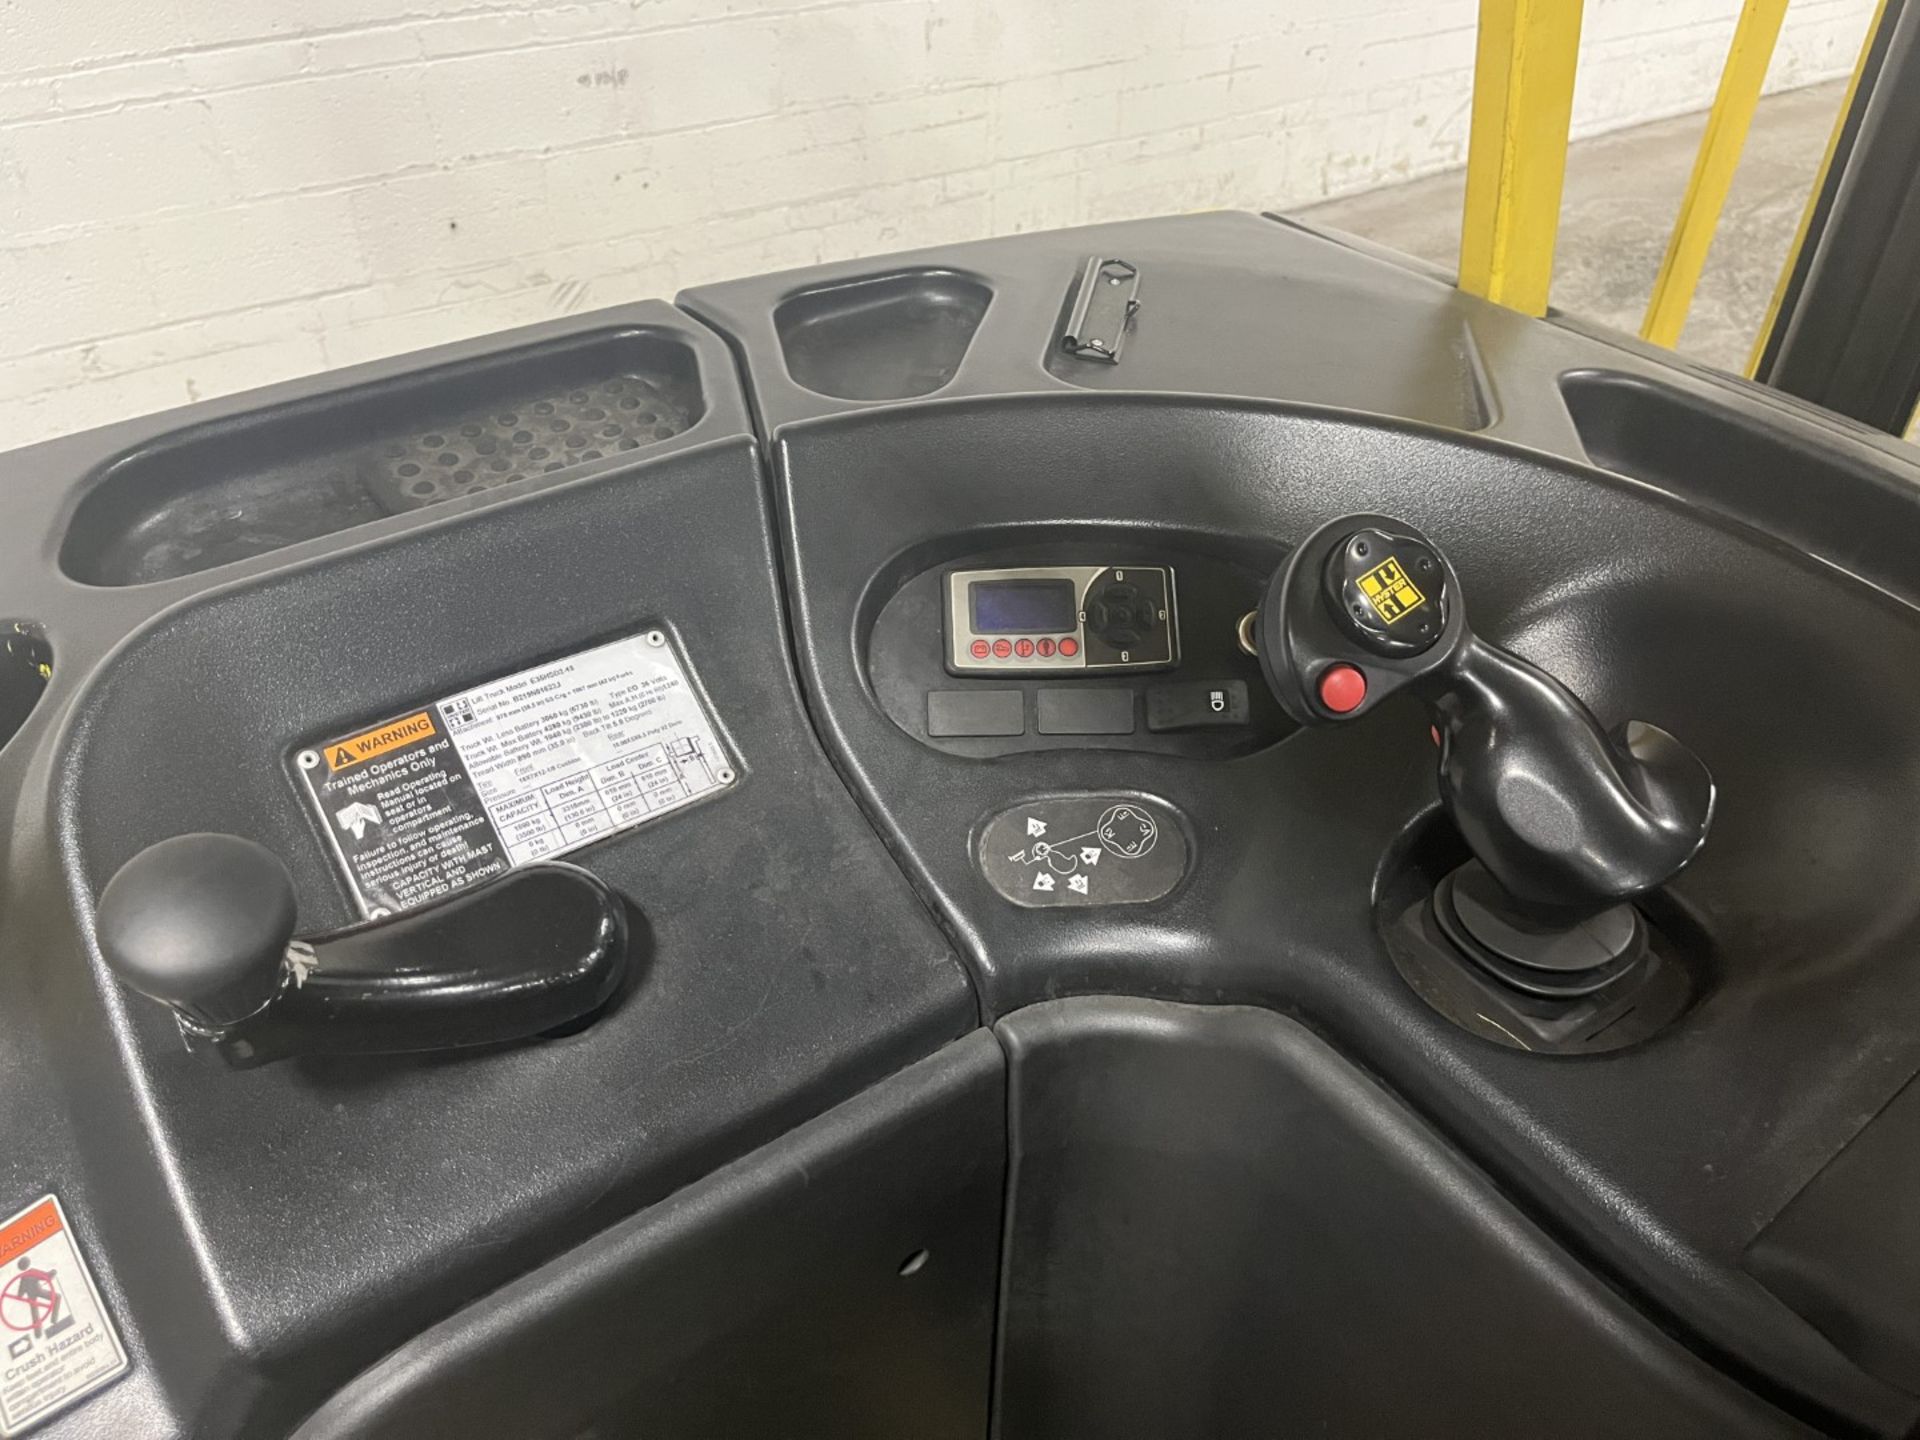 Hyster Stand up forklift, Model E35HSD2-18 SN B219N01622J (TAG # 1200033) Ships from Cleveland, OH - Image 6 of 6